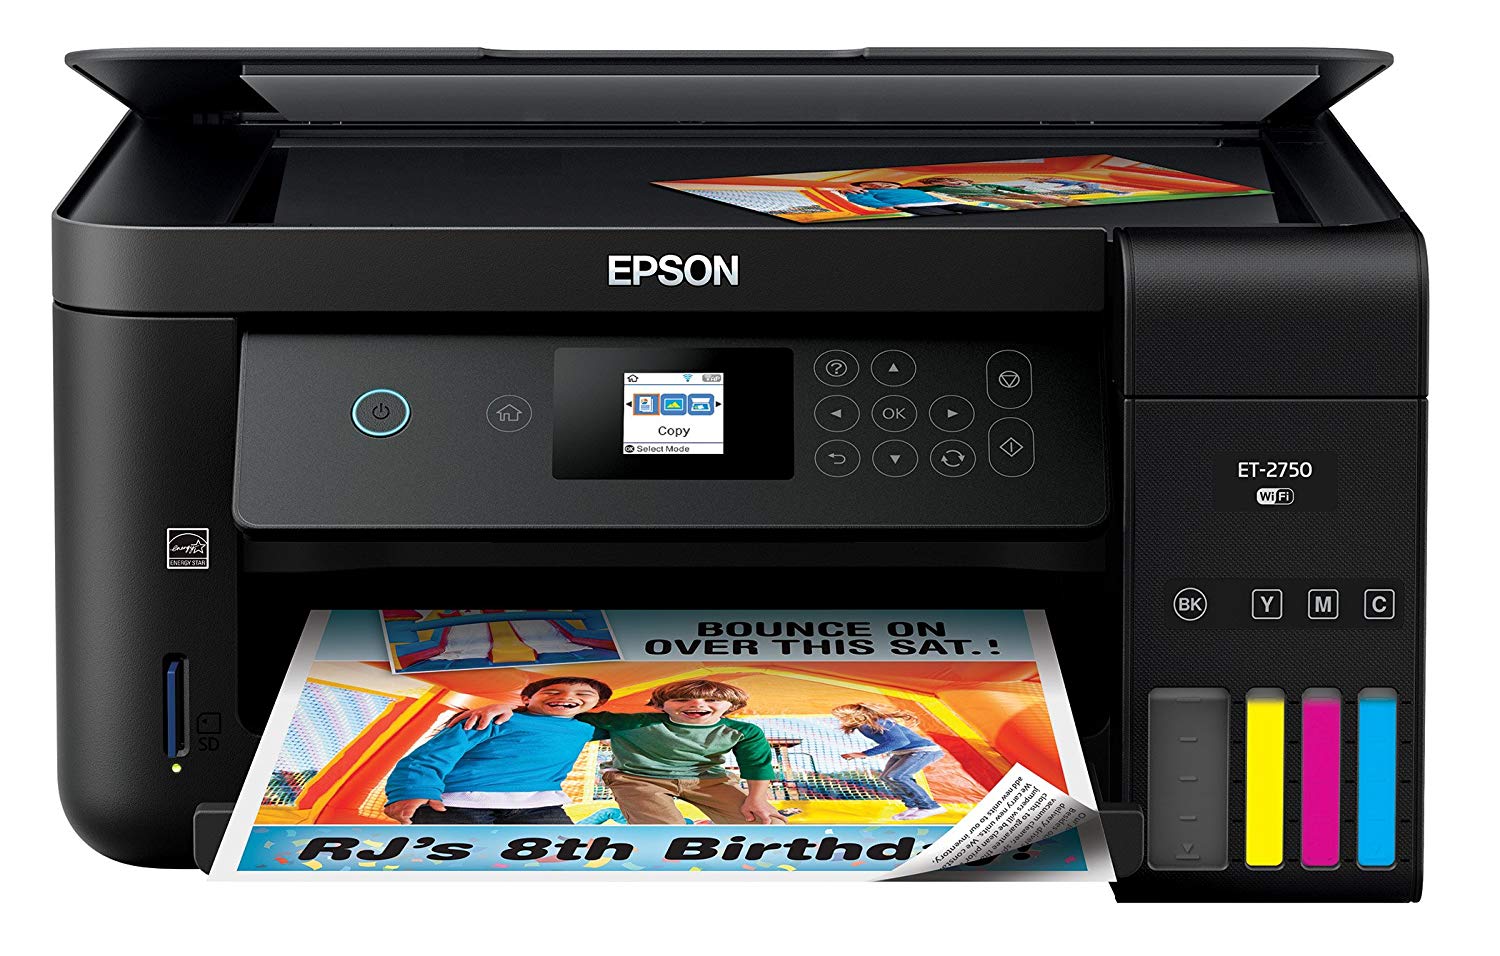 Epson ET-2750 EcoTank All-in-One Wireless Printer Review